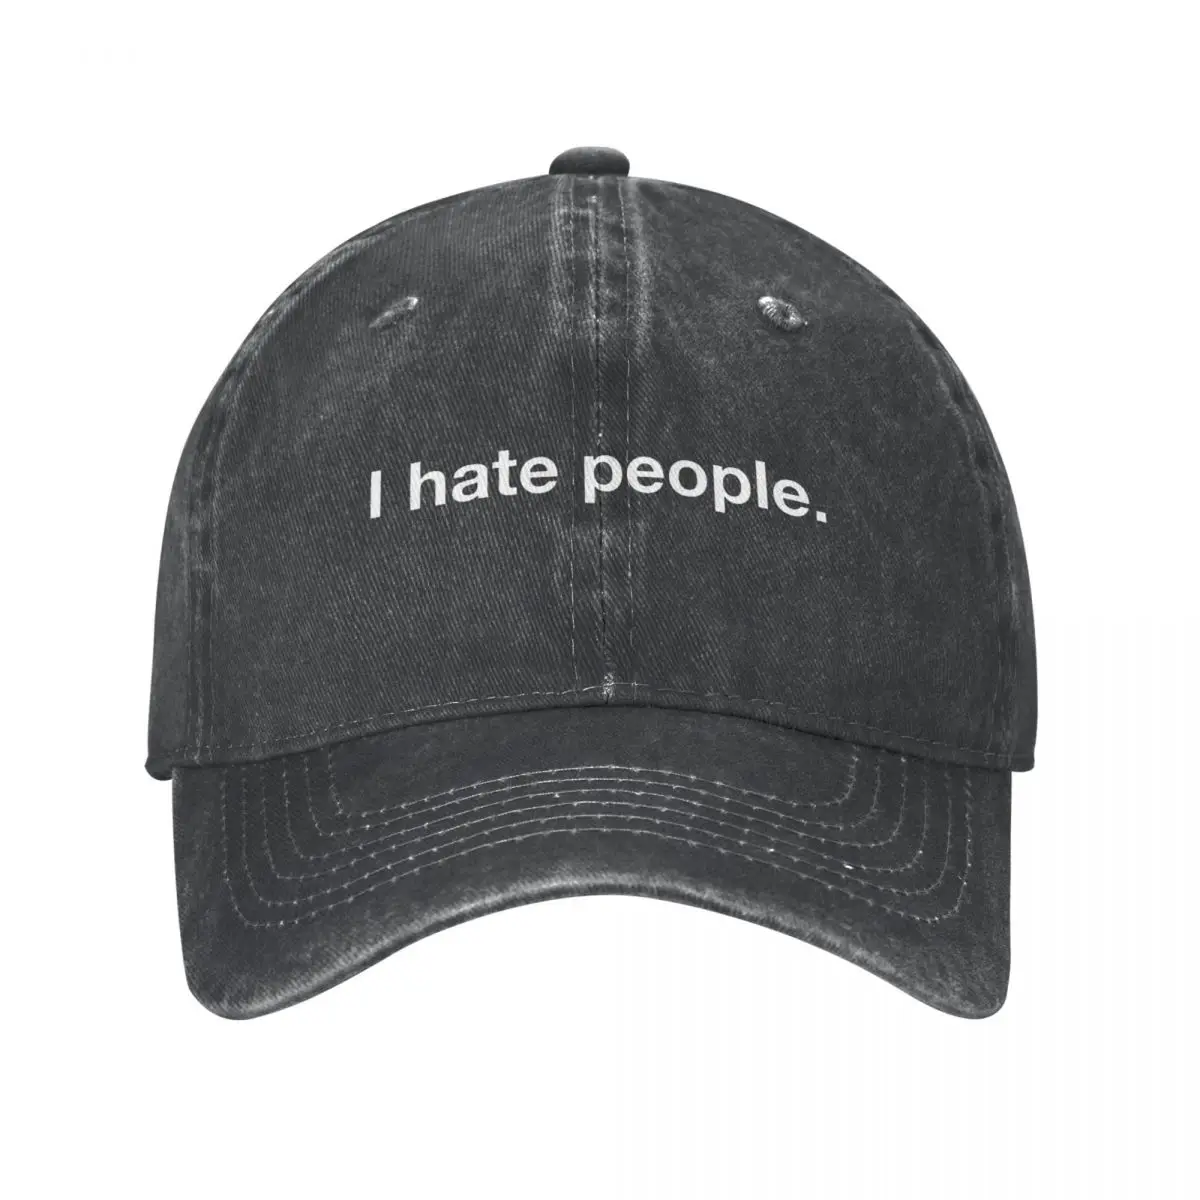 Vintage Cotton I Hate People Baseball Cap For Boy Girl Snapback Sun Hats Sarcastic Solitary Autism Anxious Anxiety Shy Cap Hats